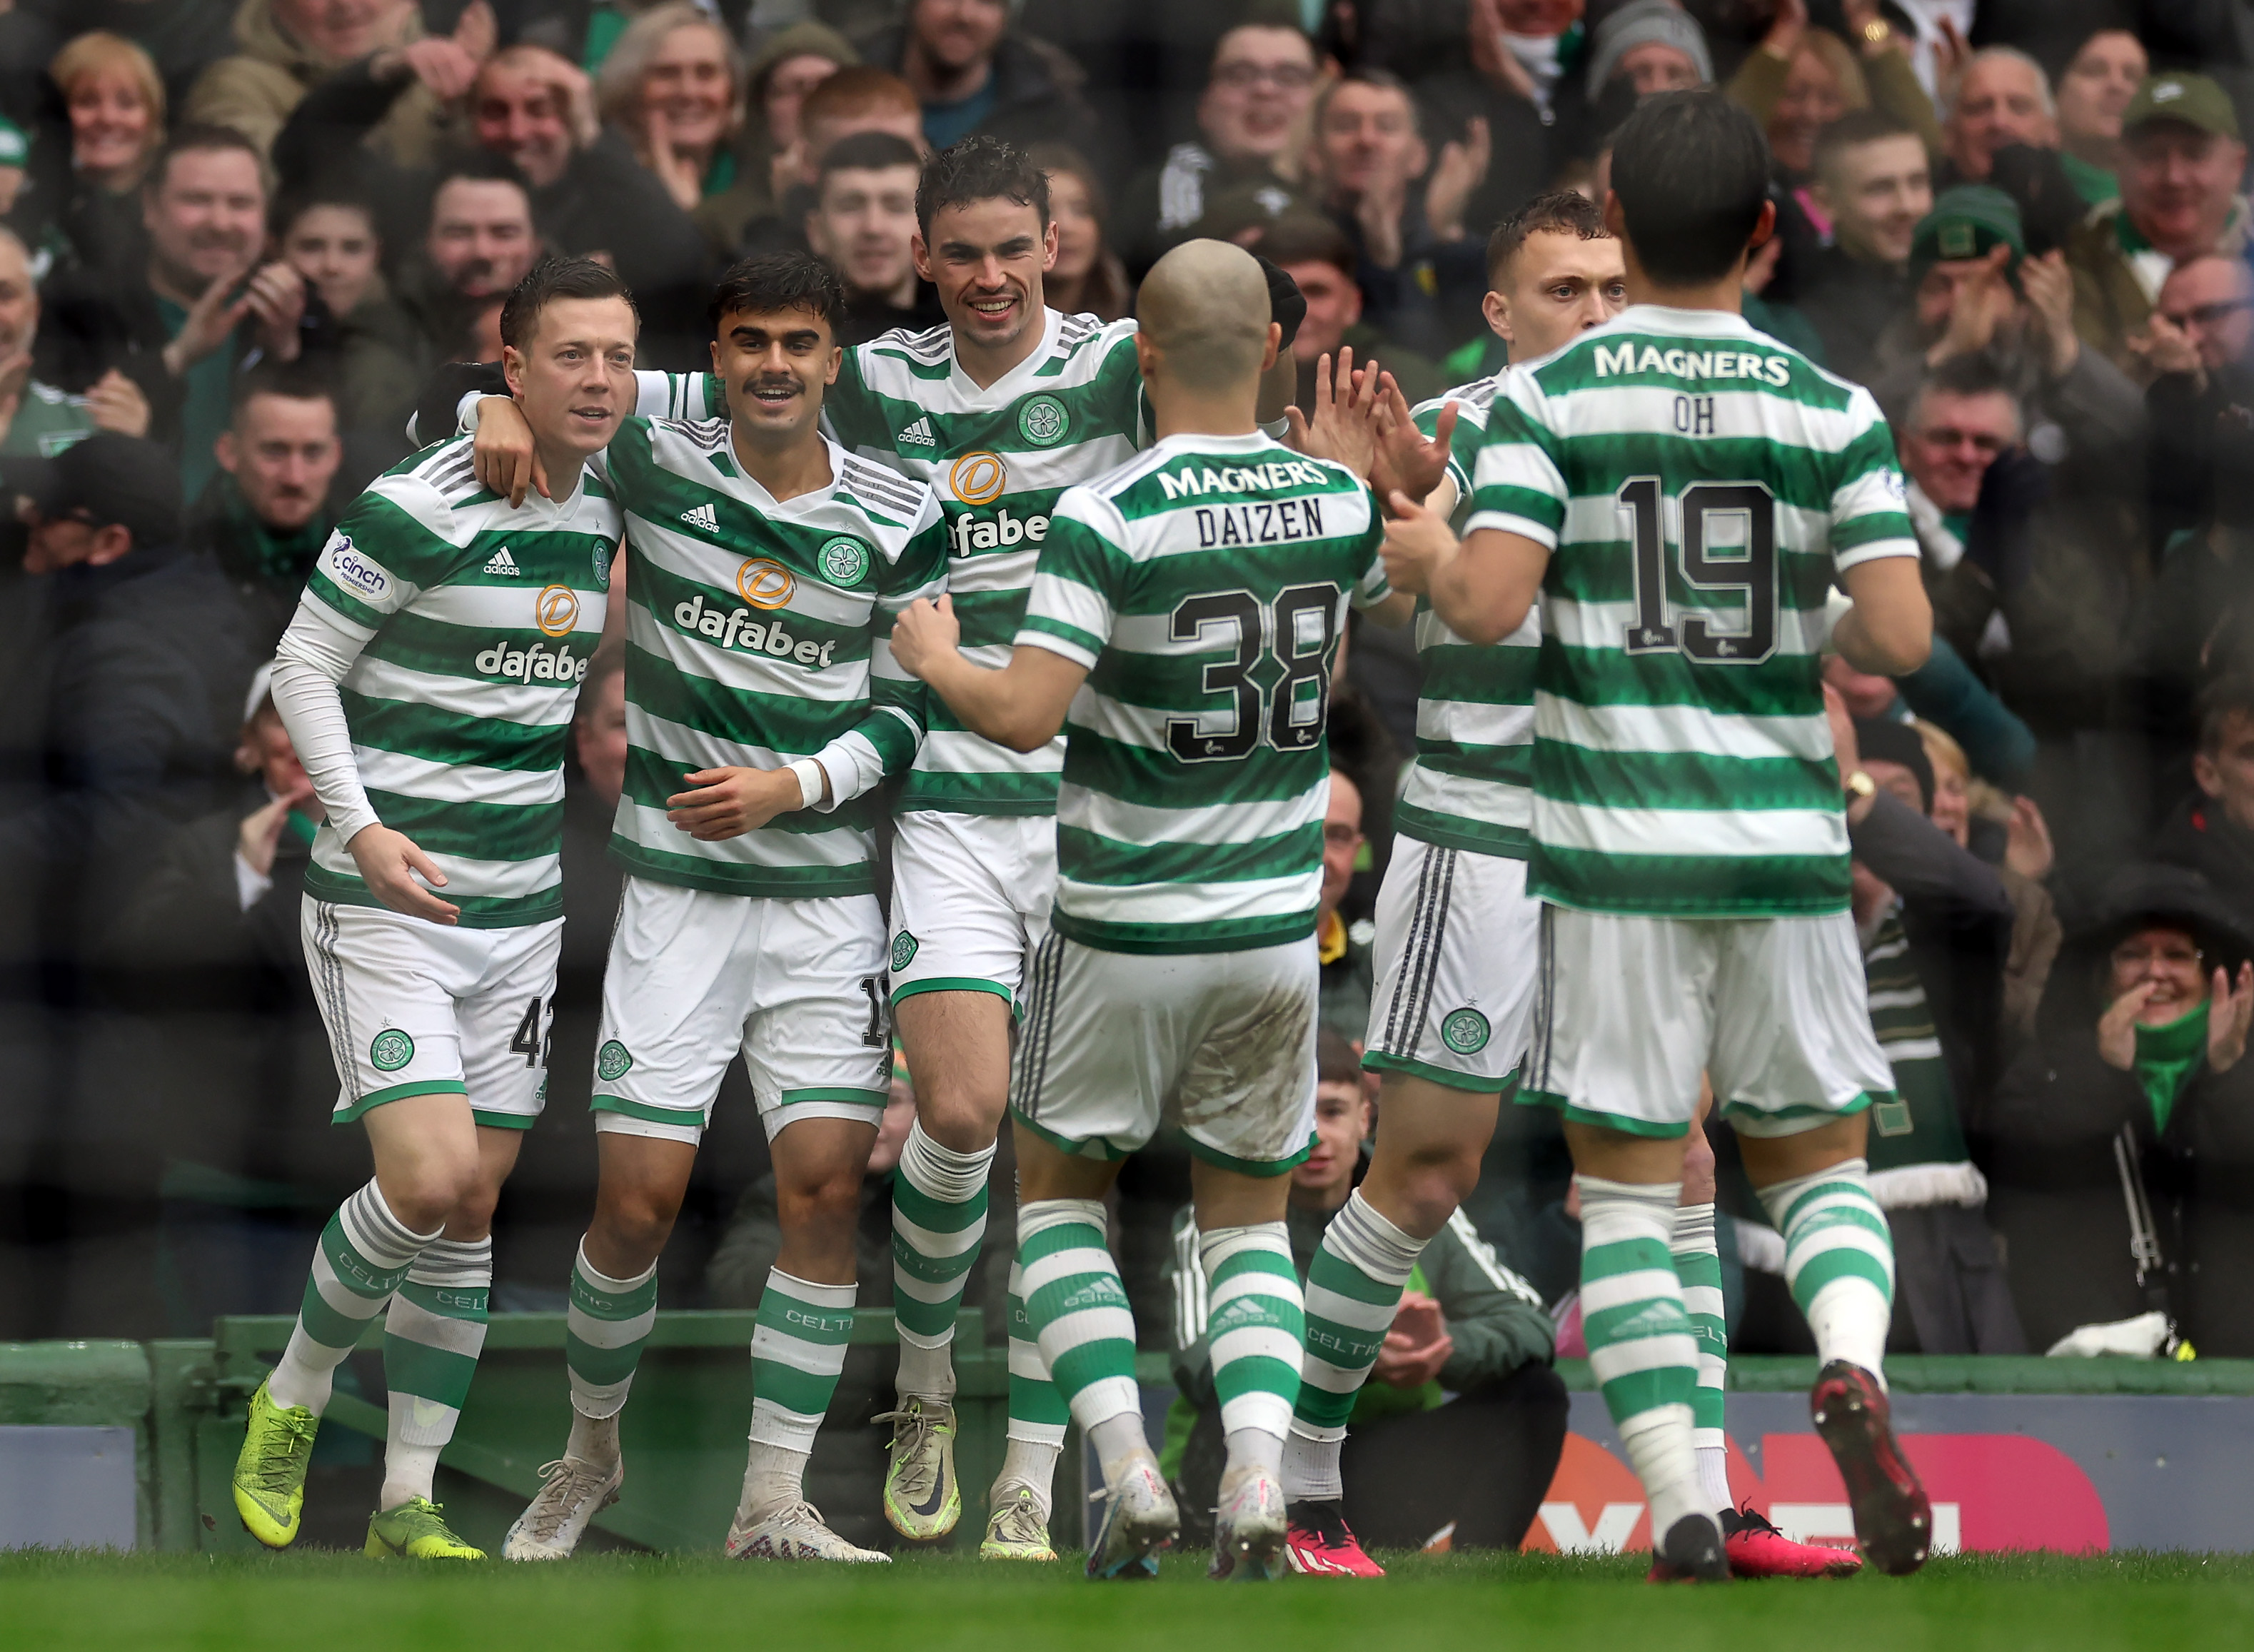 Celtic v Hearts team news, match officials, KO time and where to watch